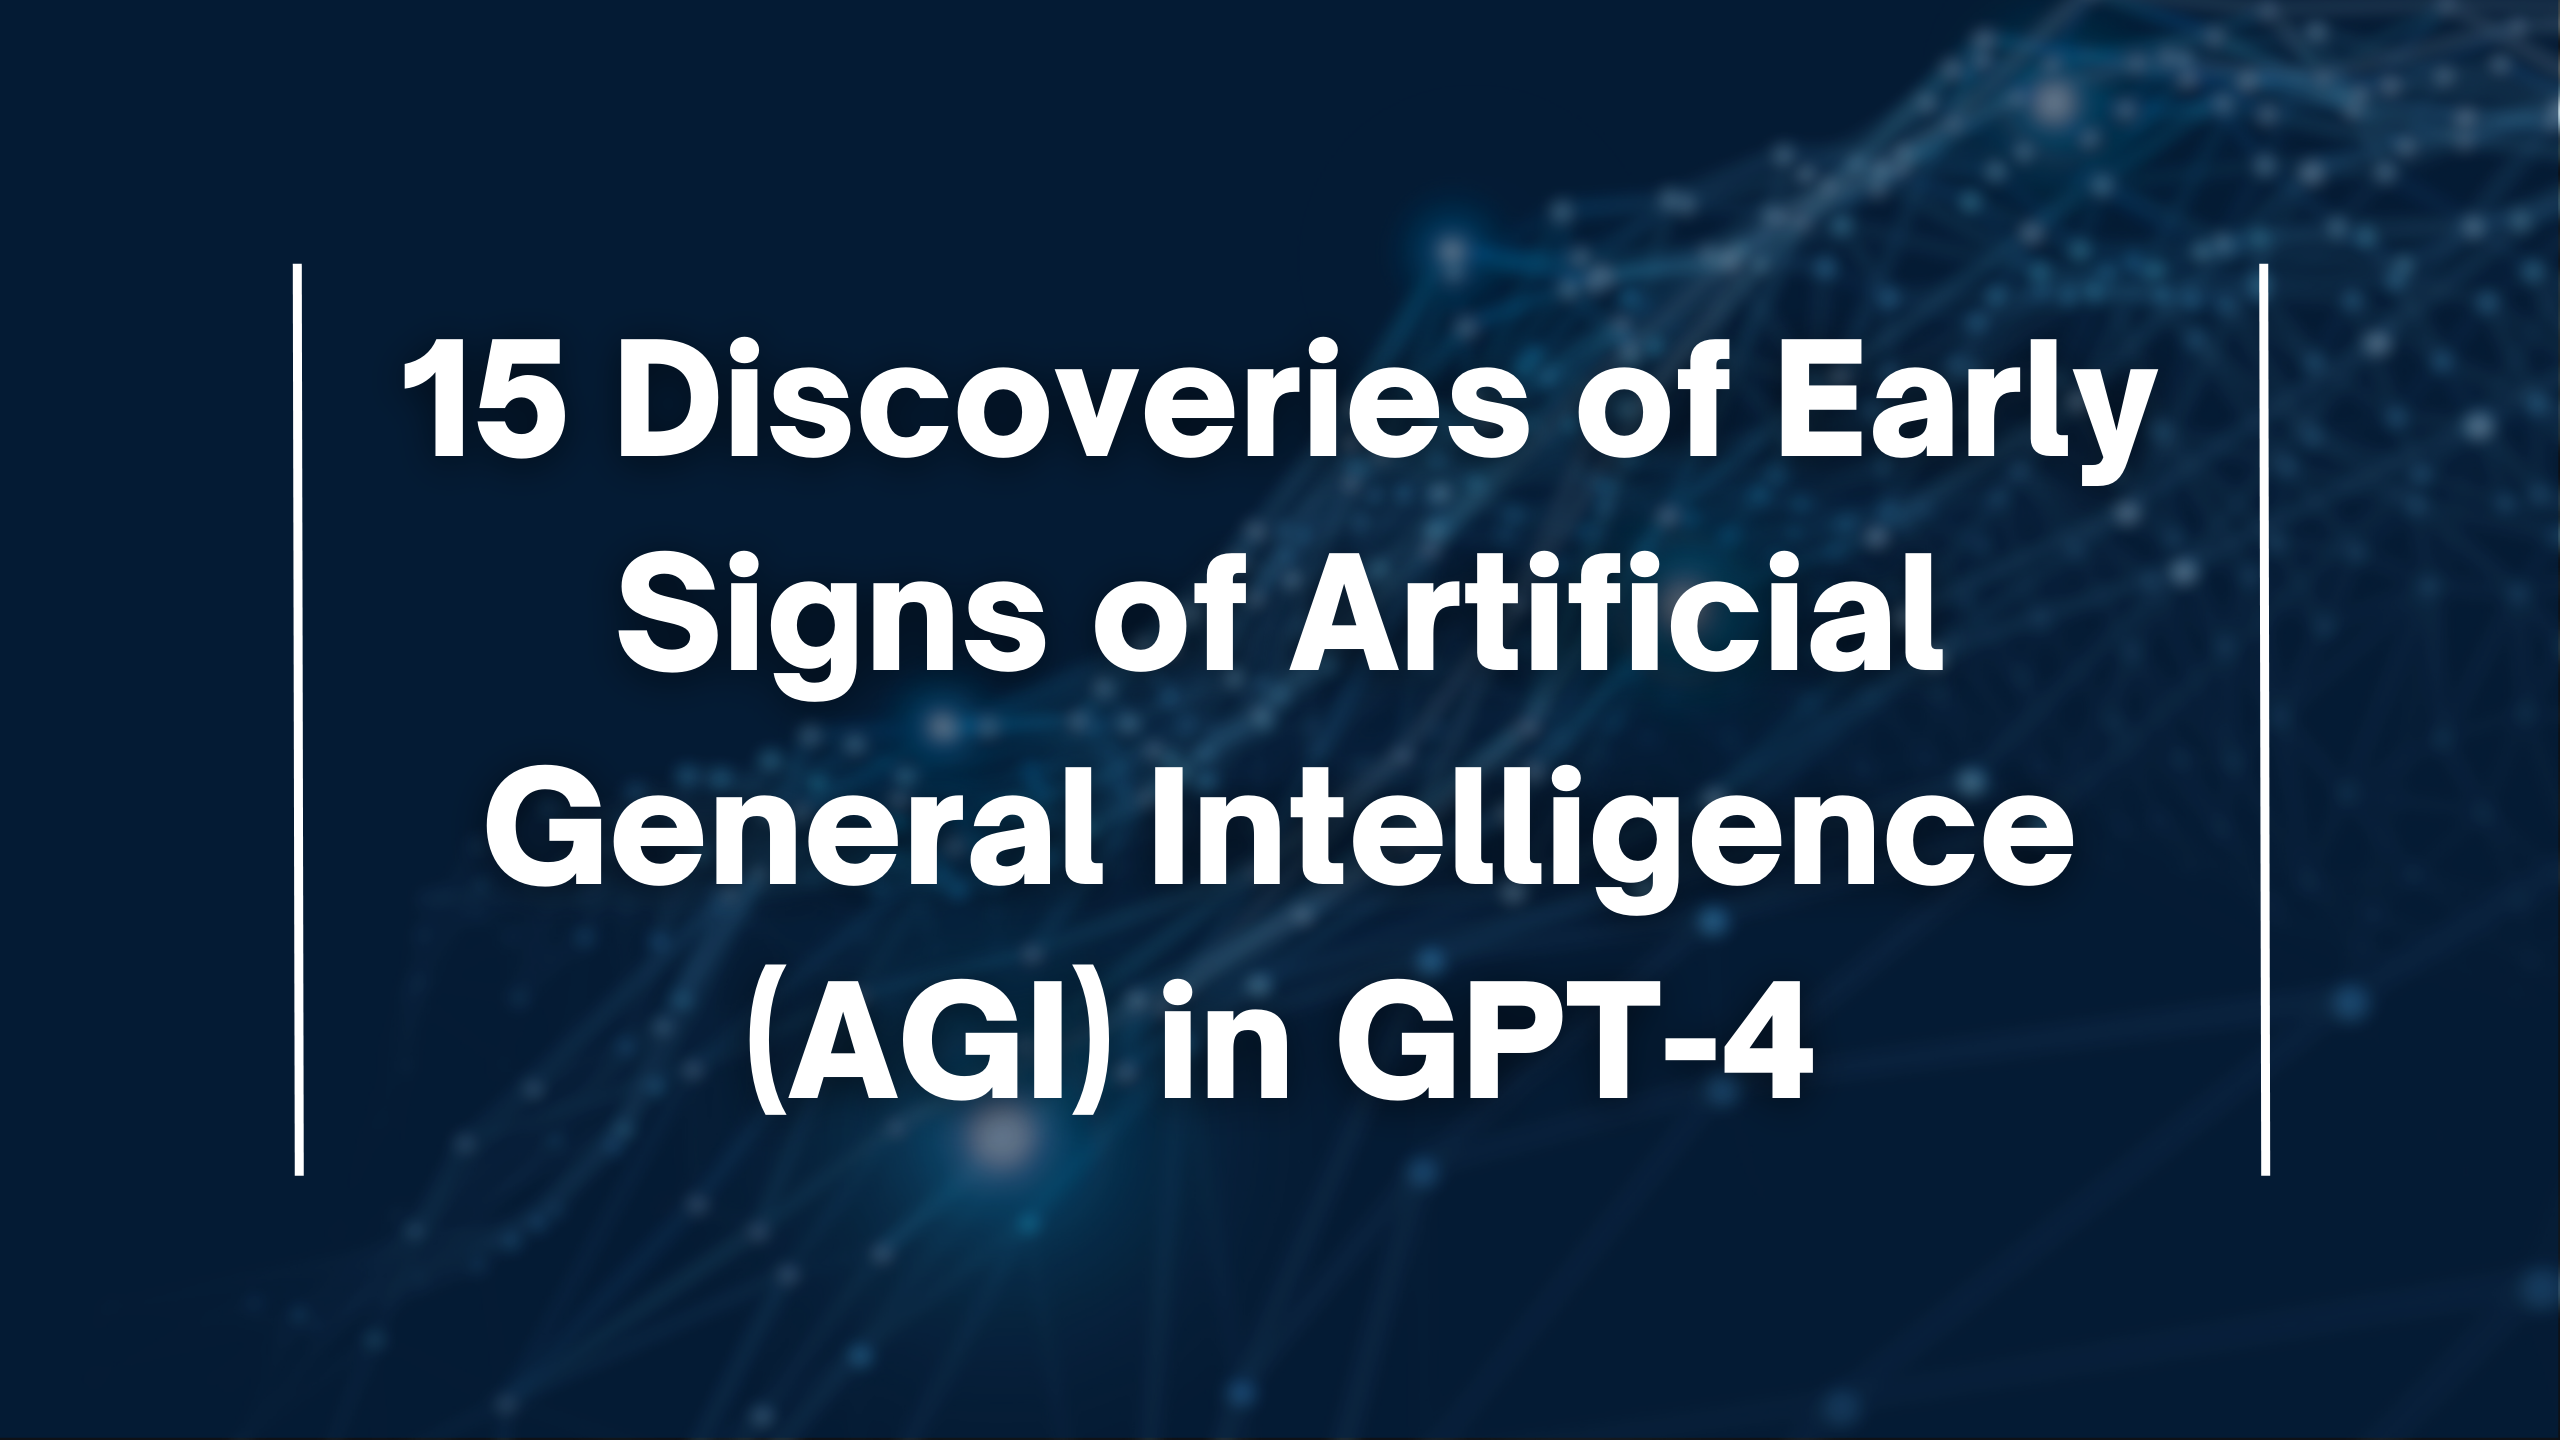 15 Discoveries of Early Signs of Artificial General Intelligence (AGI) in GPT-4